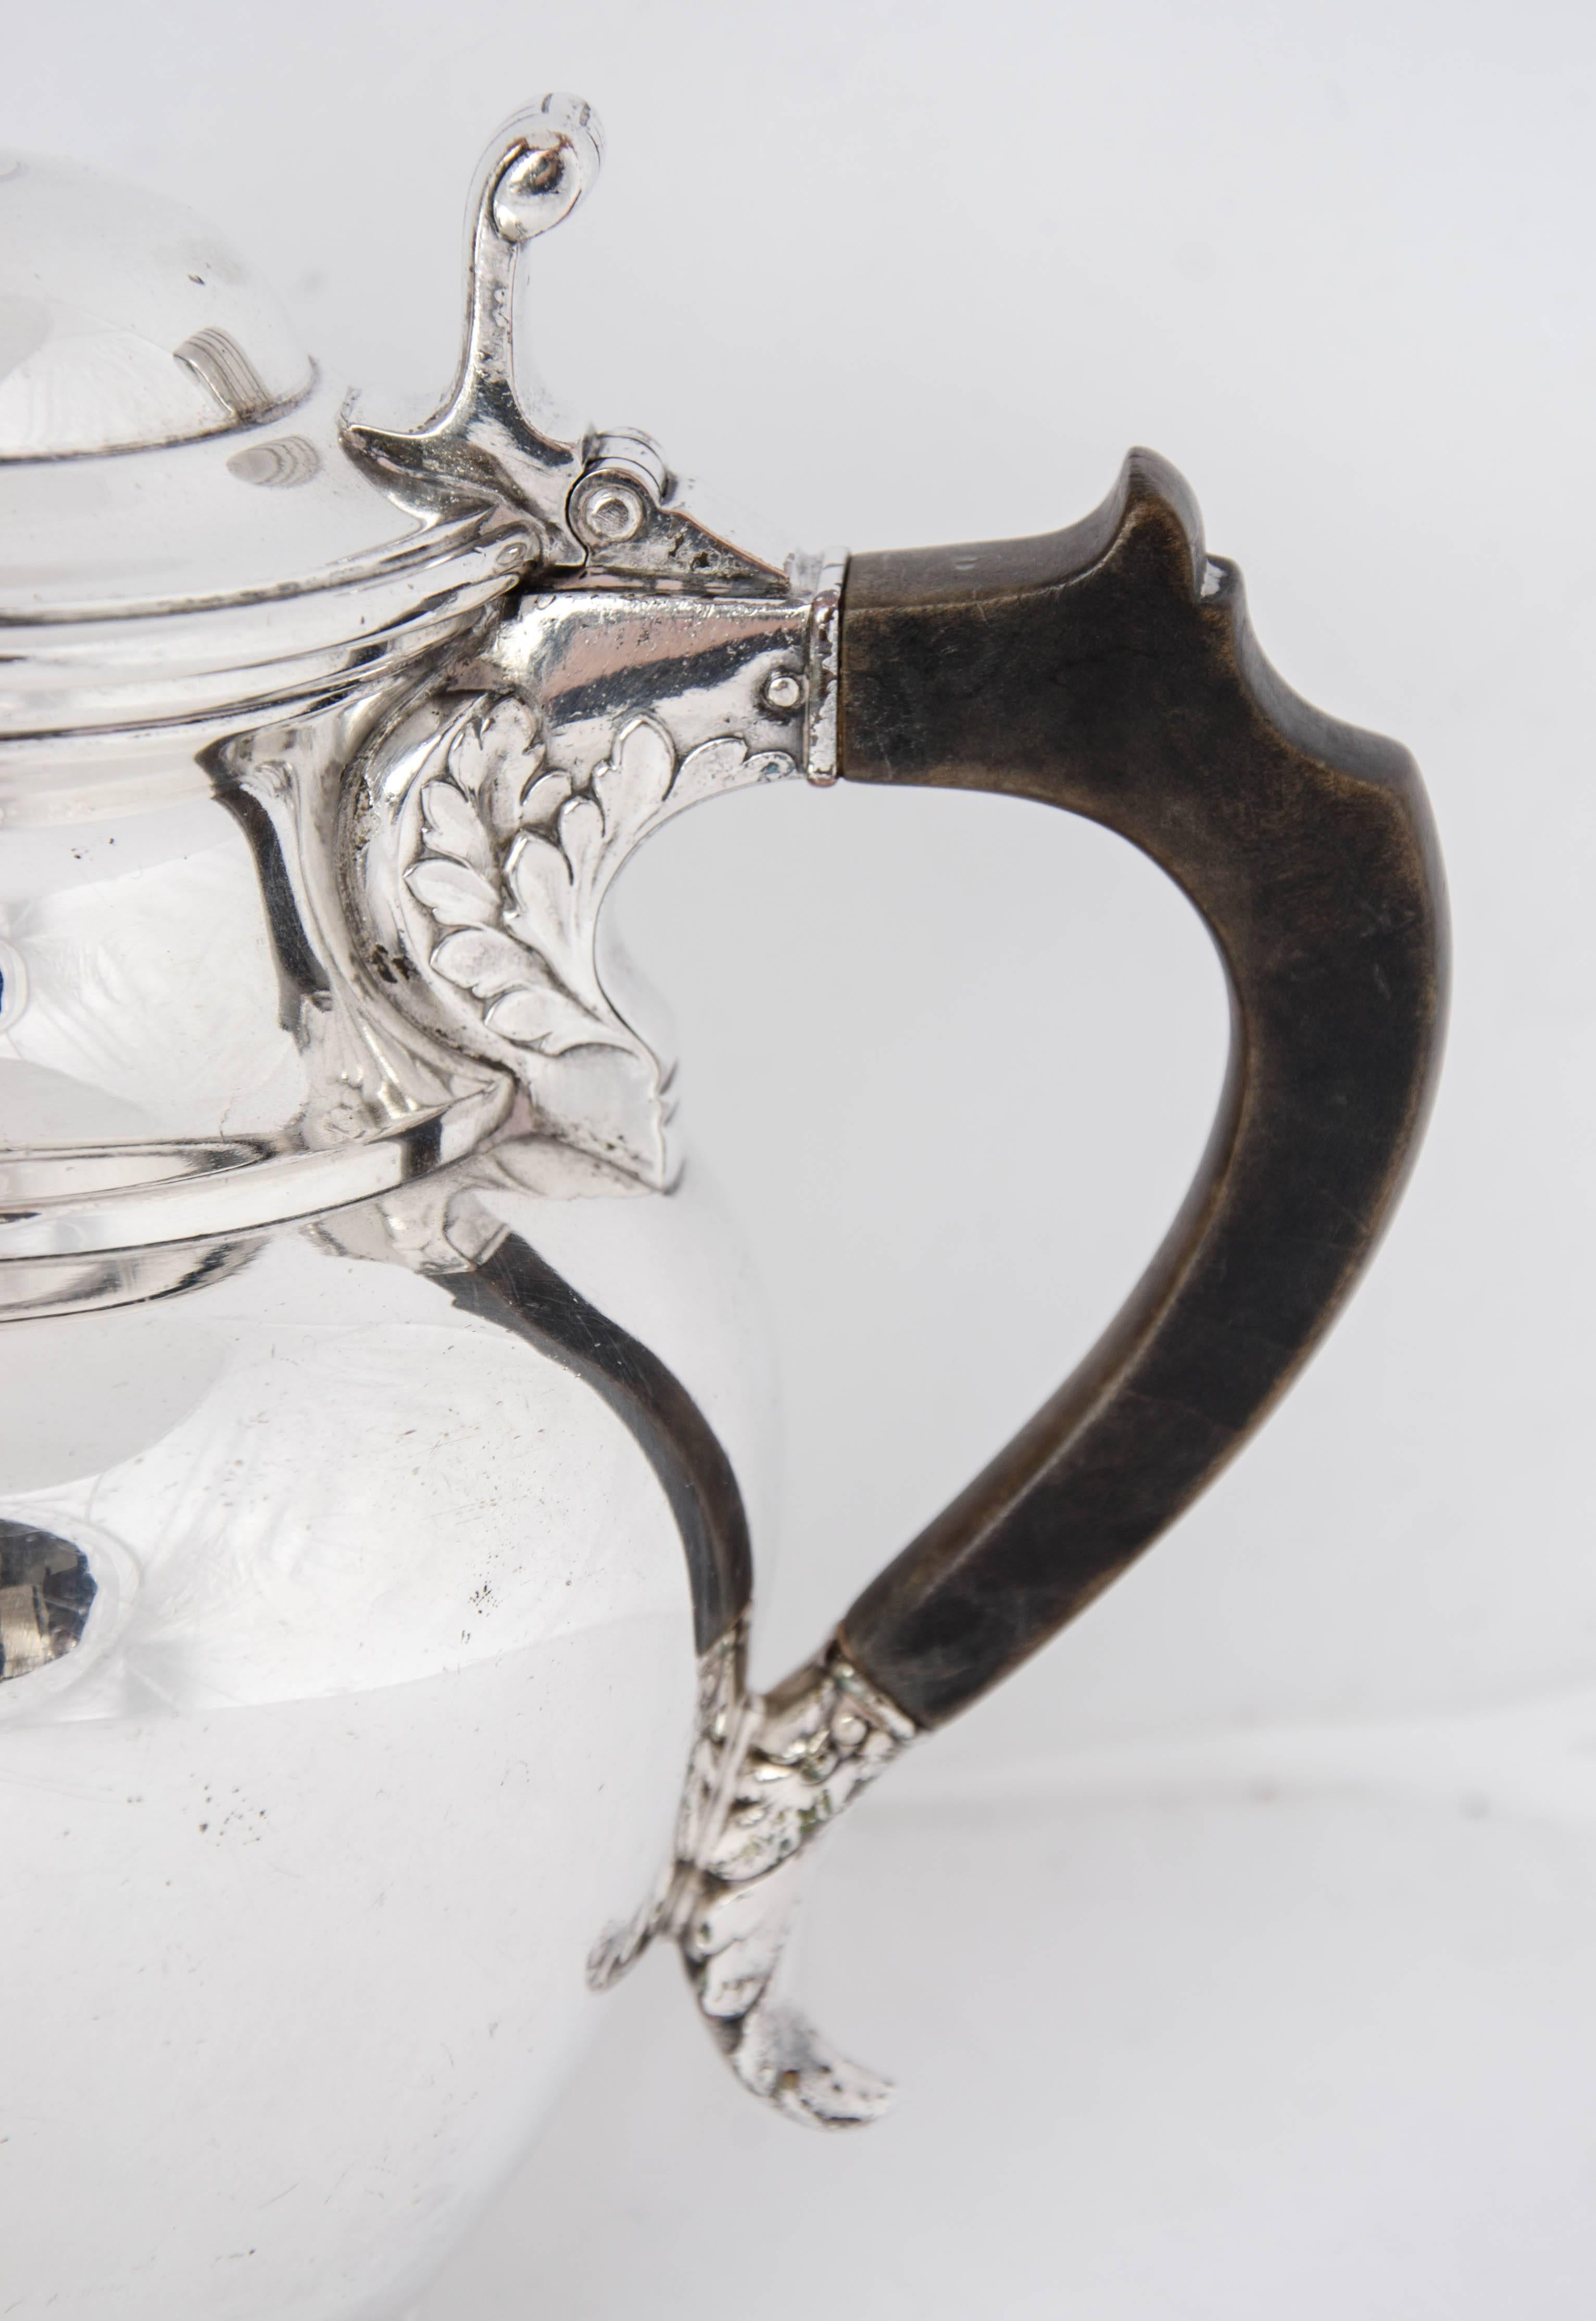 Silver plated beer jug, circa 1900. A fun novel way to serve beer, wine or your choice of beverage. Great as part of your barware and certainly a great talking point.

Please contact us for shipping prices.